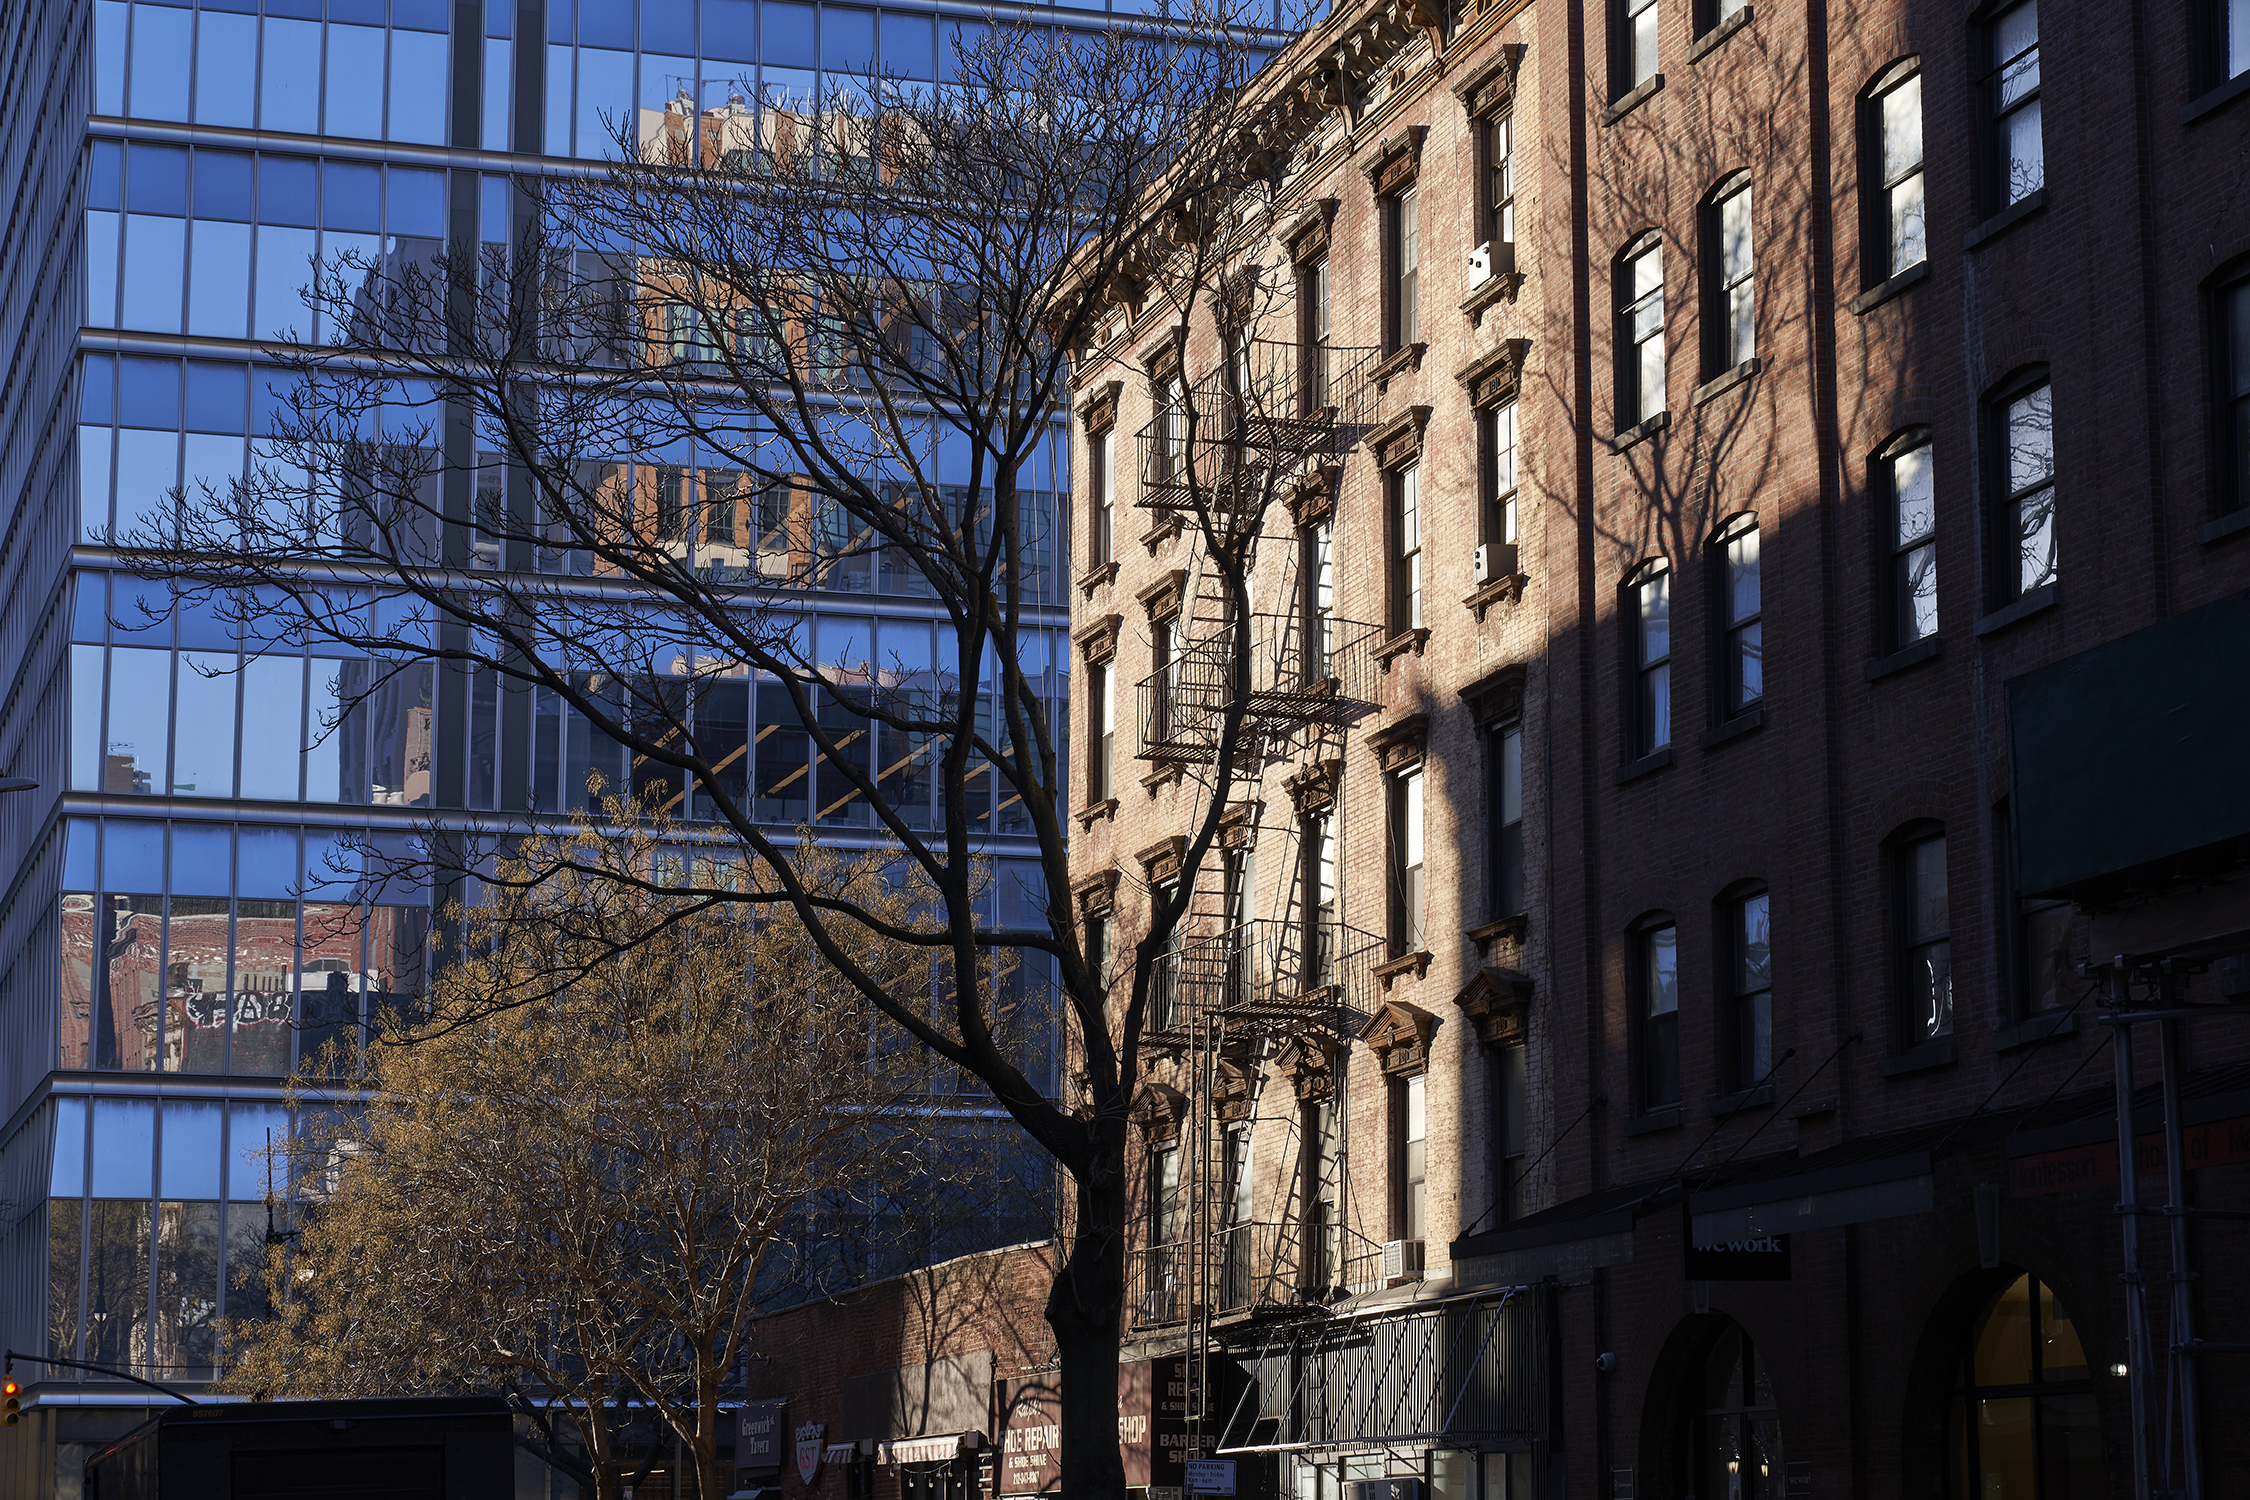 A redbrick warehouse building sits next to a modern glass and concrete building in Tribeca, New York